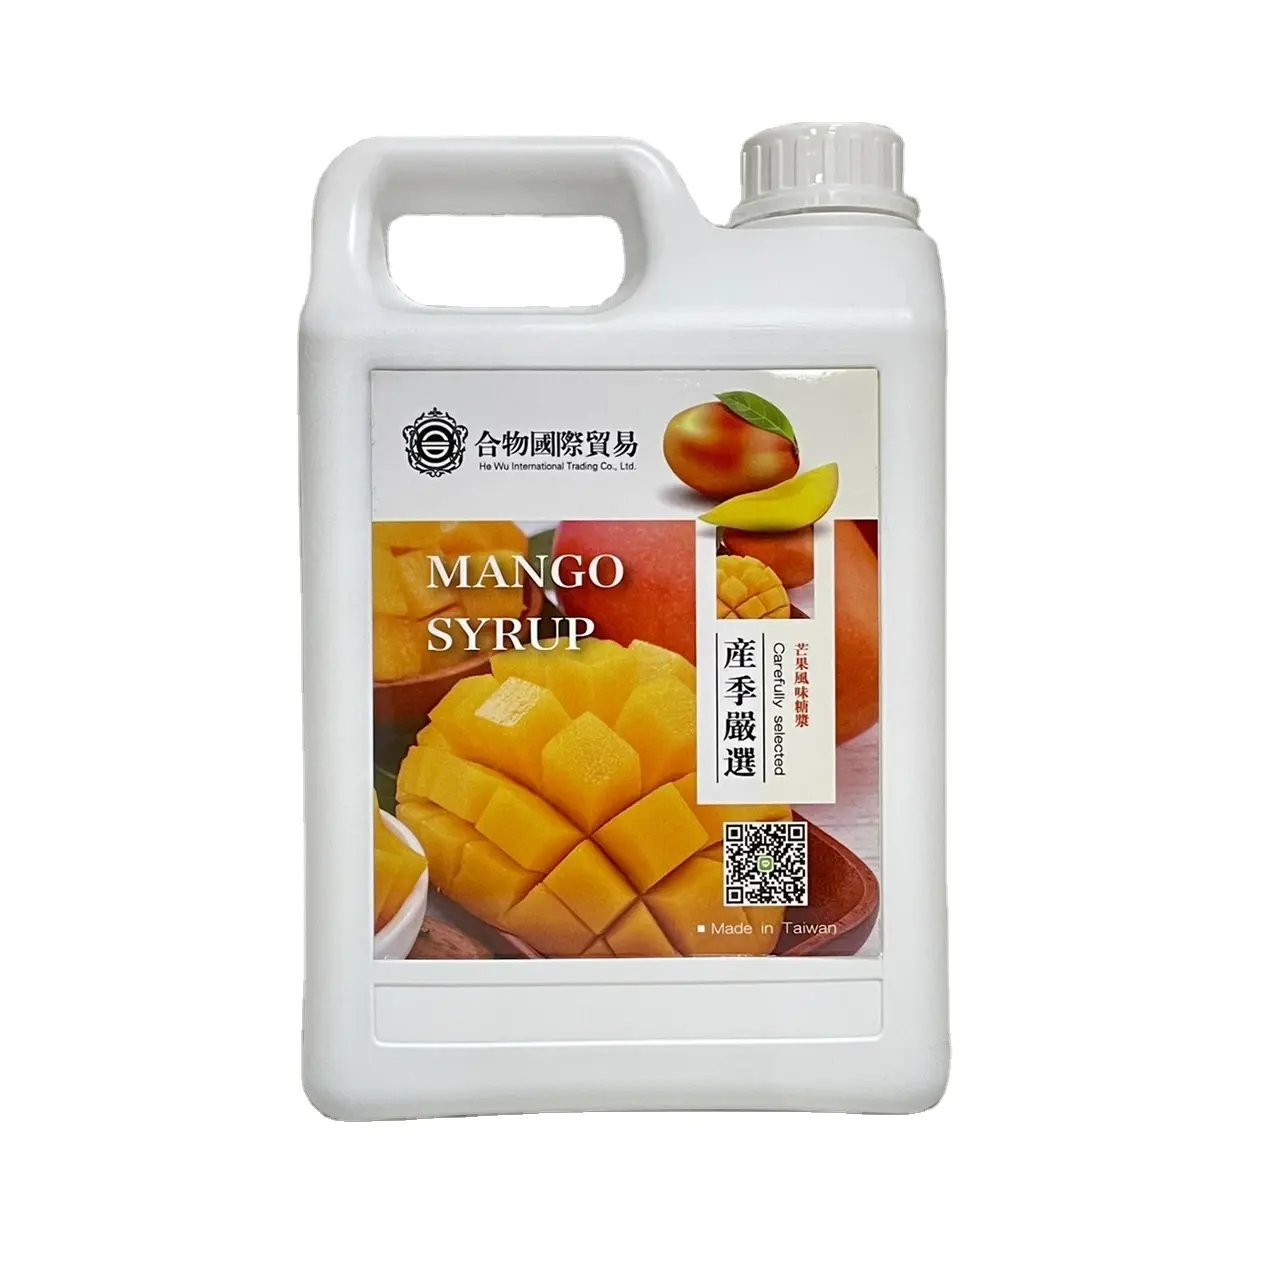 Concentrated mango juice syrup for Taiwan's popular bubble milk tea